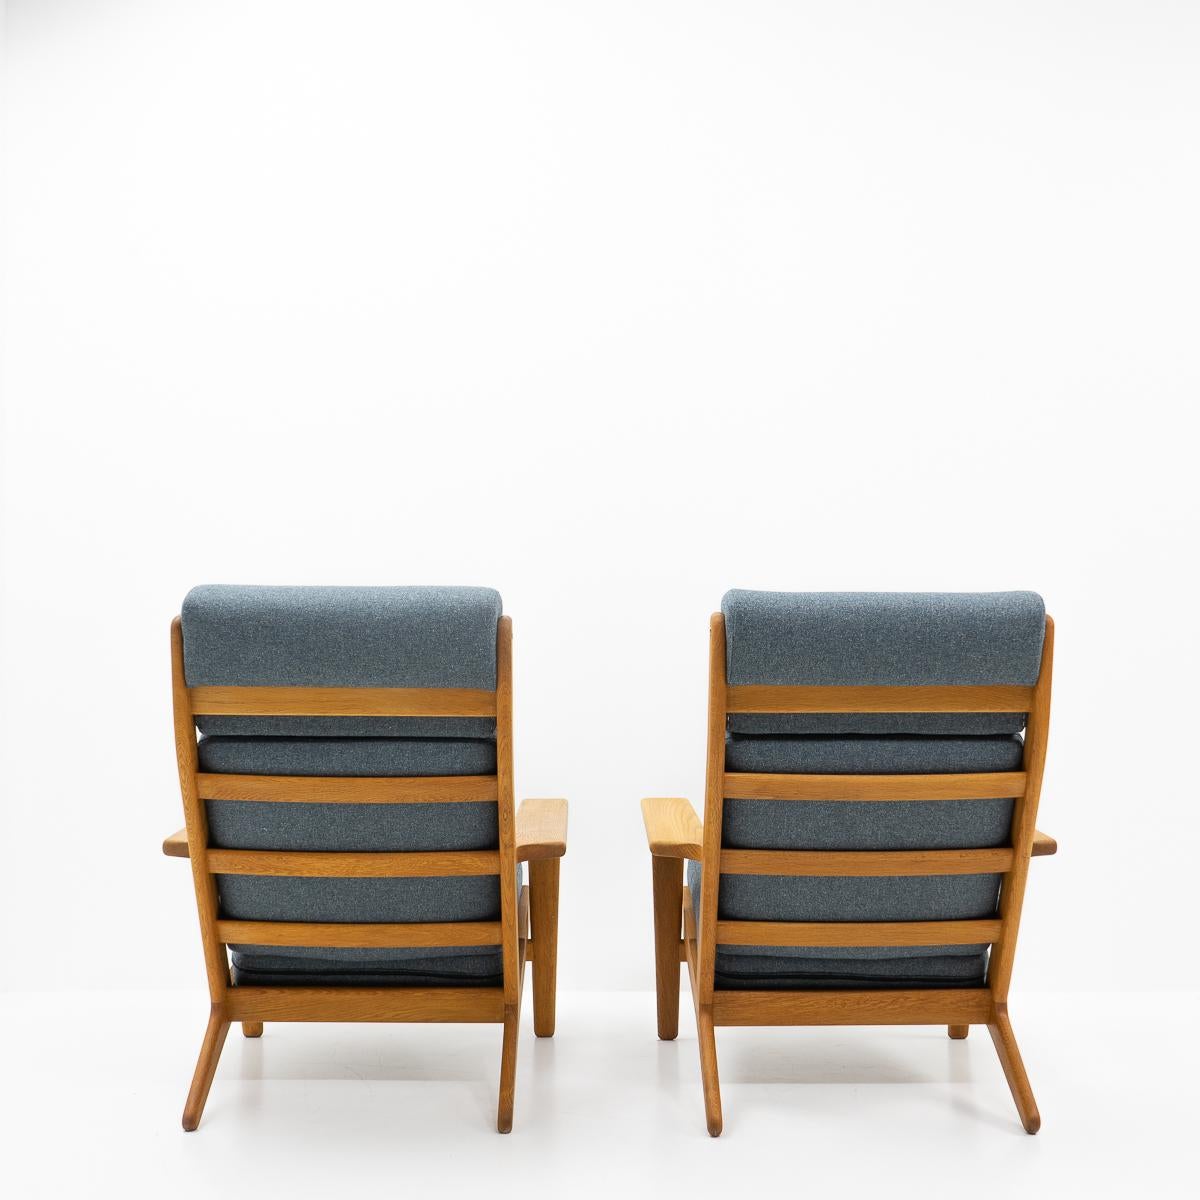 Danish Design Classic GE 290 Arm Chairs by Hans Wegner for Getama, 1960s In Good Condition For Sale In Renens, CH